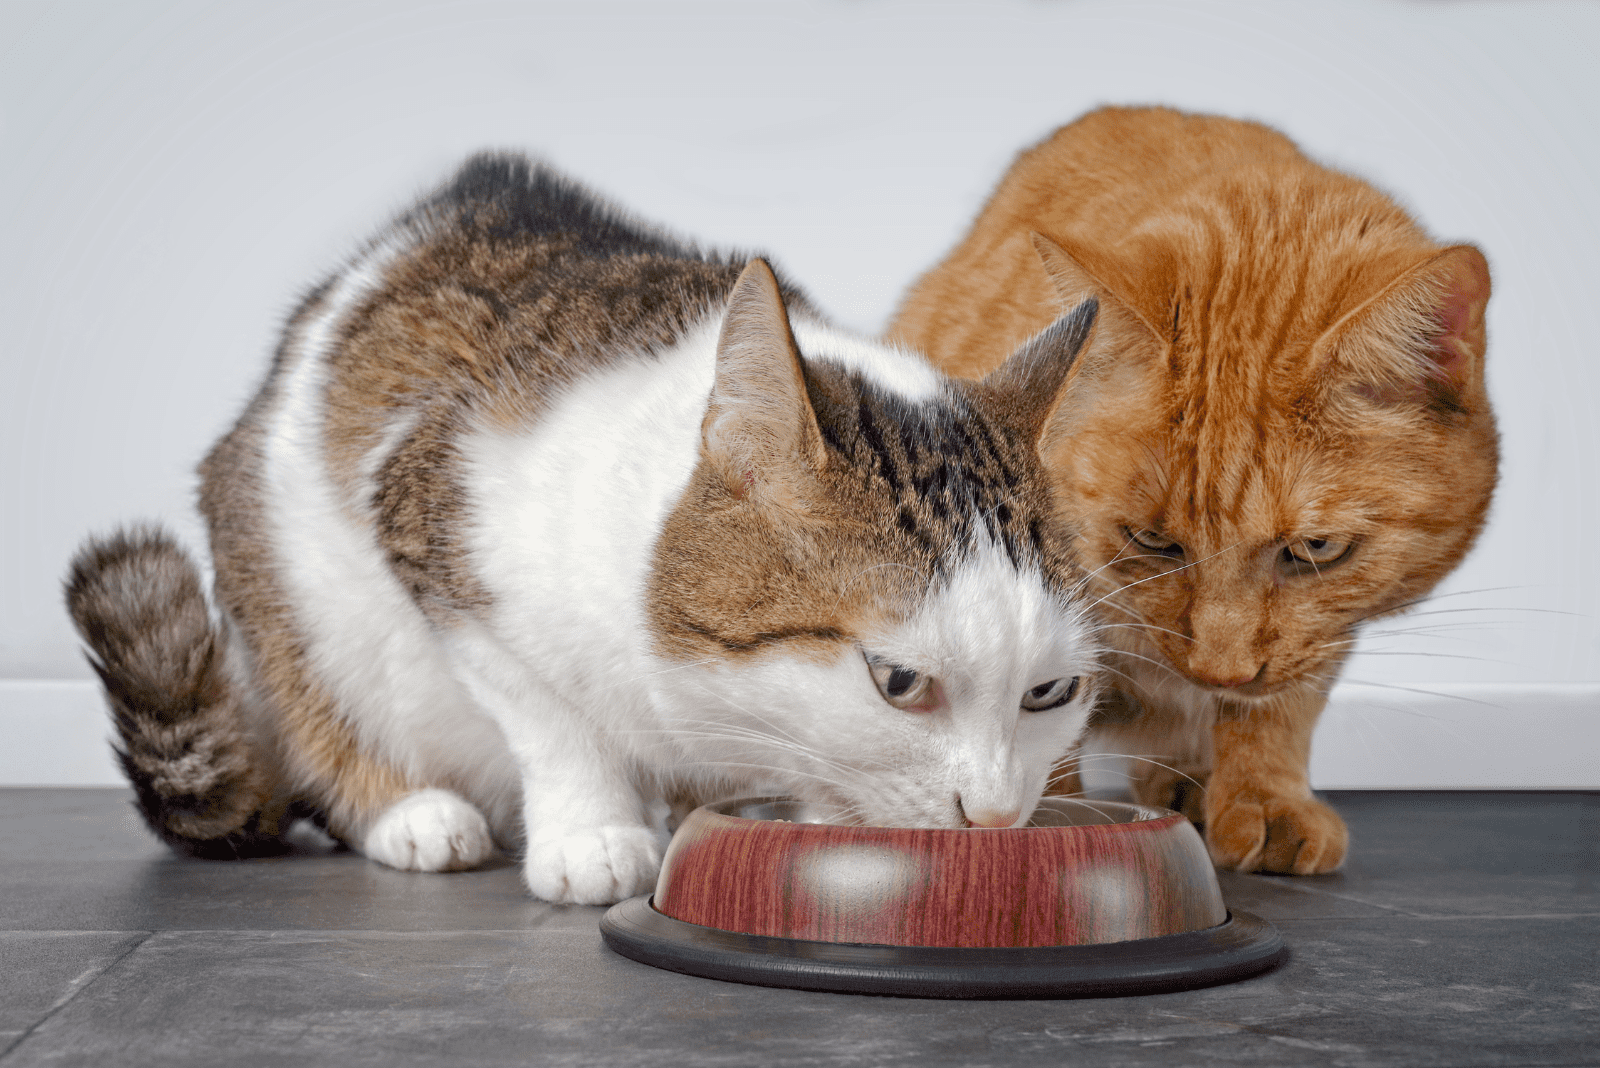 one cat eats from the bowl while the other stands next to it